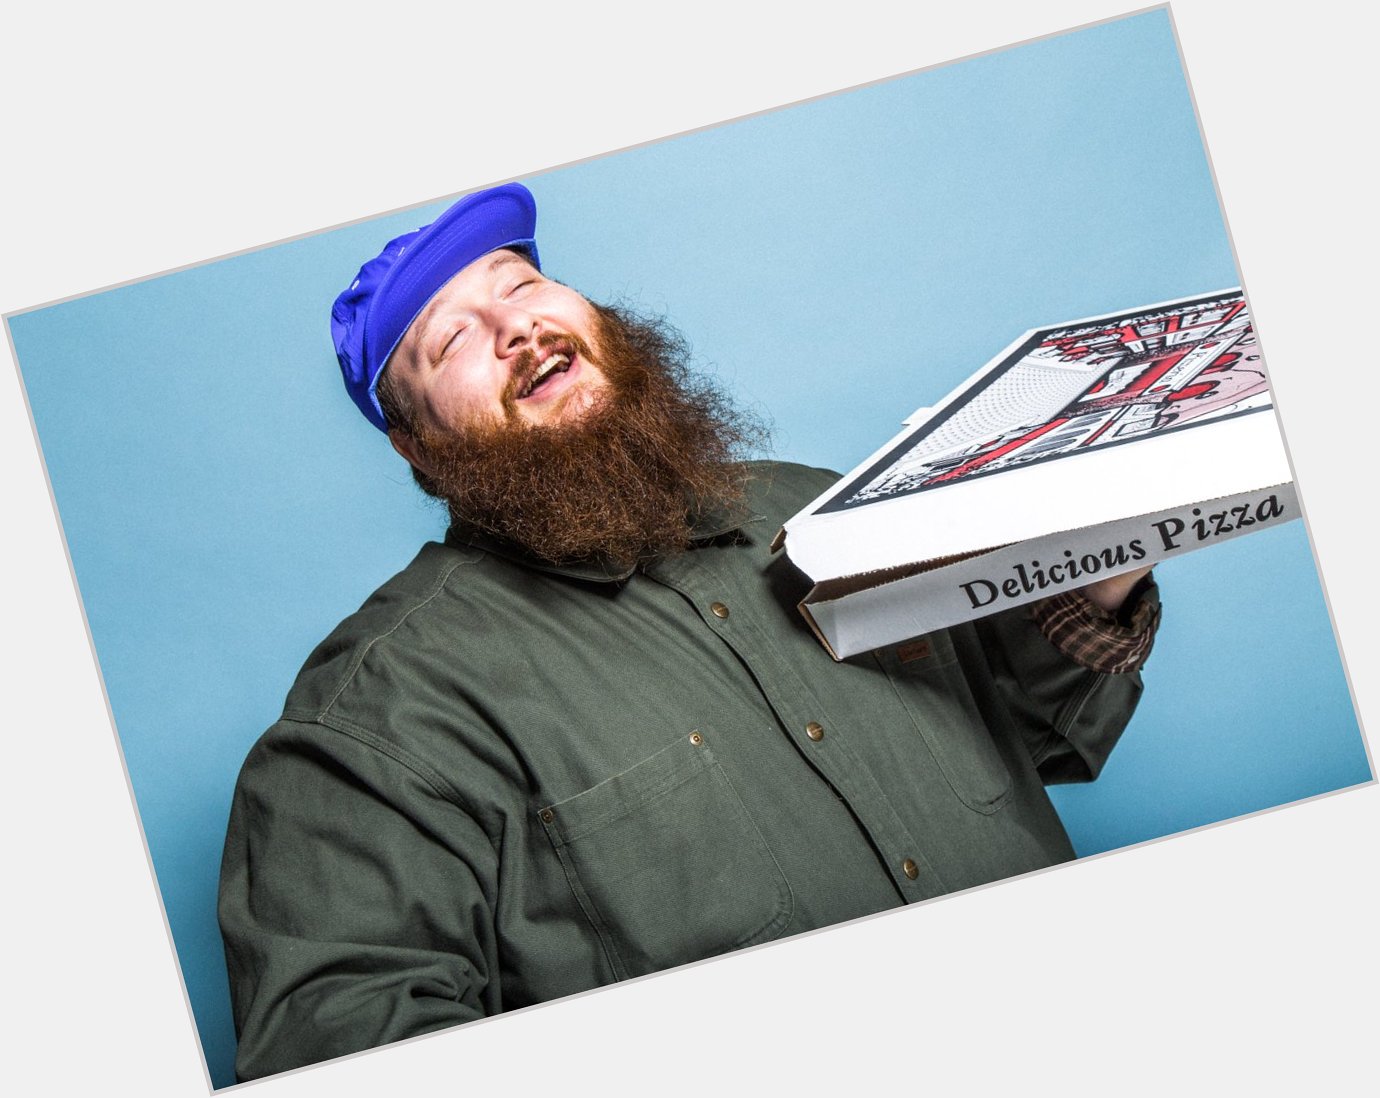 Today is the birthday of Action Bronson.
Happy Birthday 